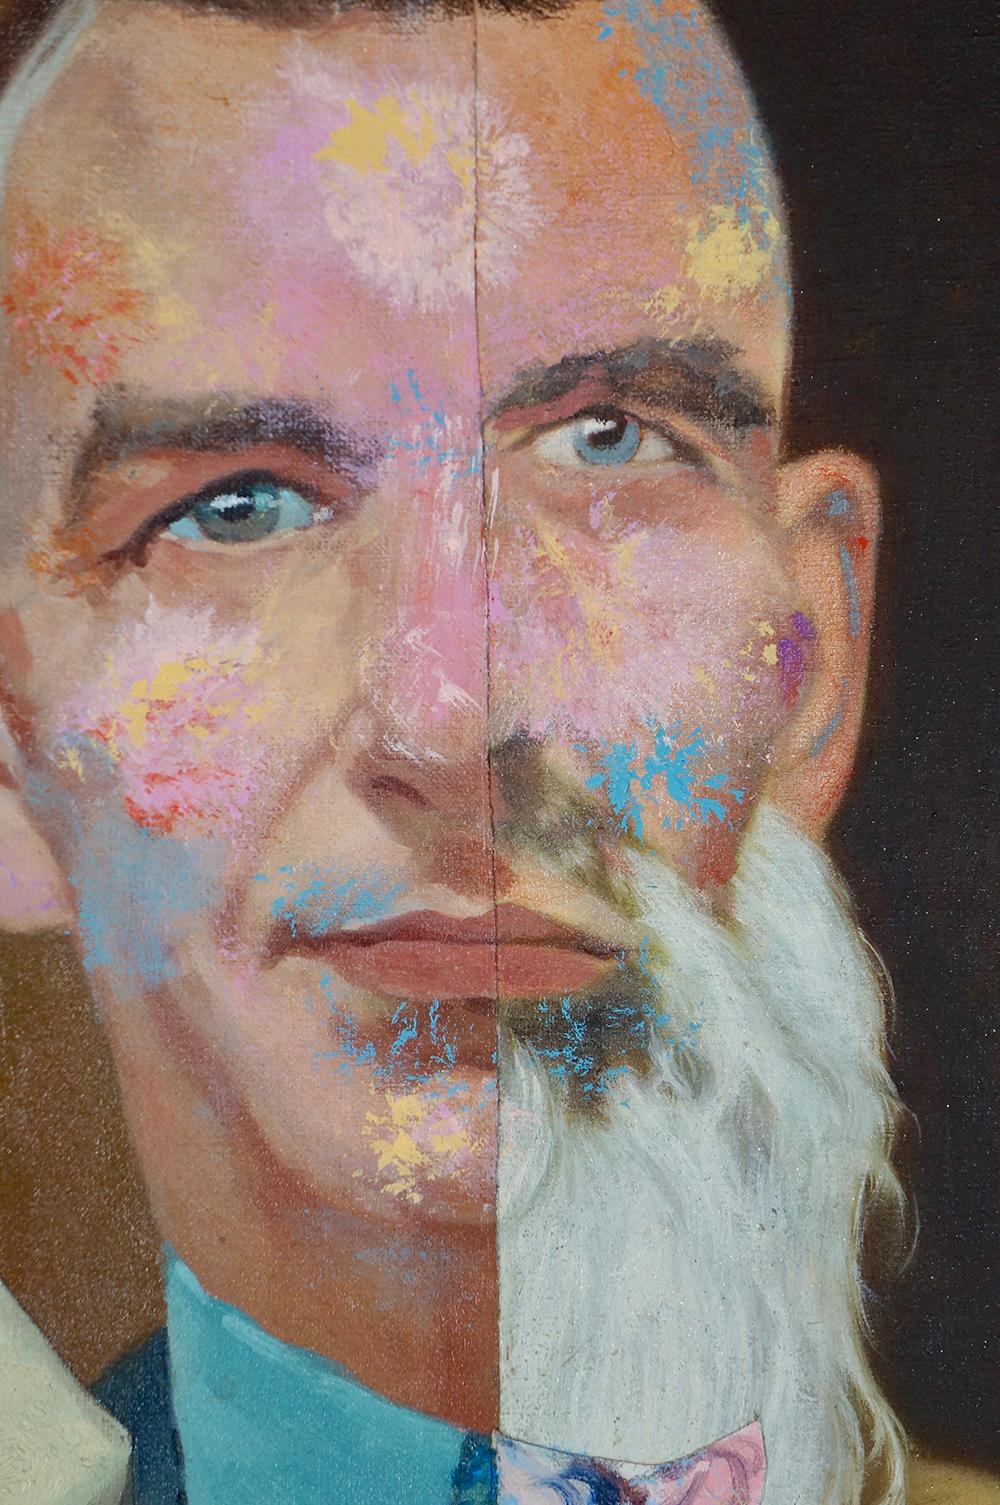 John Baker’s “He Stayed Behind in Katmandu II” is an acrylic portrait painting on canvas with collage 23 x 16 inches in blues, tans, pinks and flesh tones. The western “suit” is being transformed by the eastern wisdom tradition. The figure’s face,